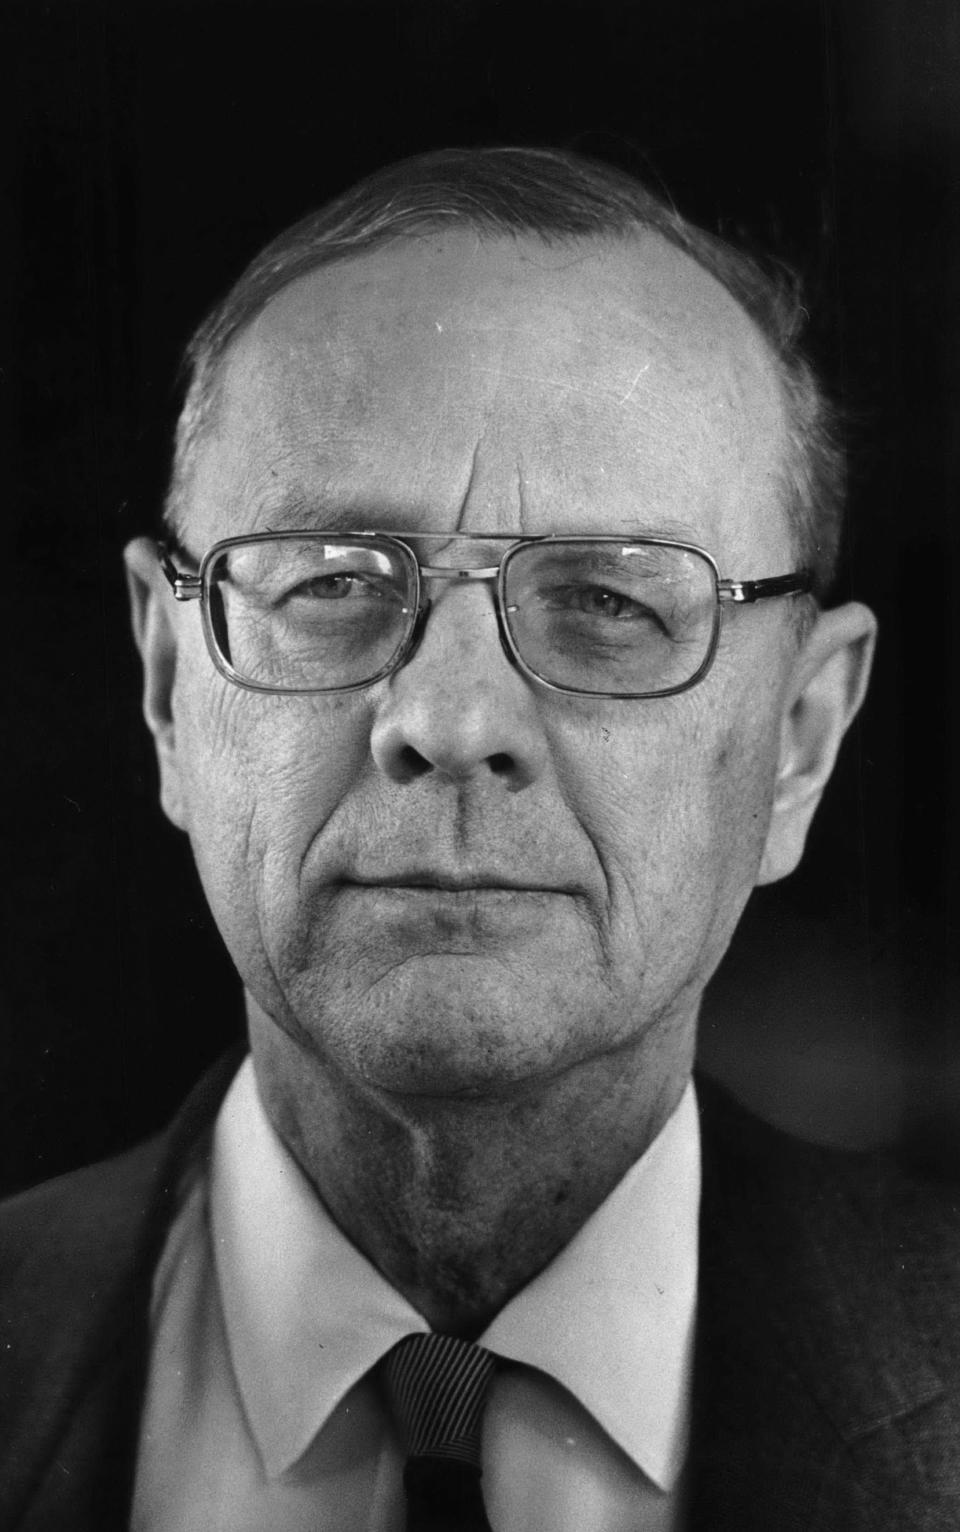 Frank P. Zeidler as pictured in 1975. He was a socialist and Milwaukee's mayor from 1948 to 1960.